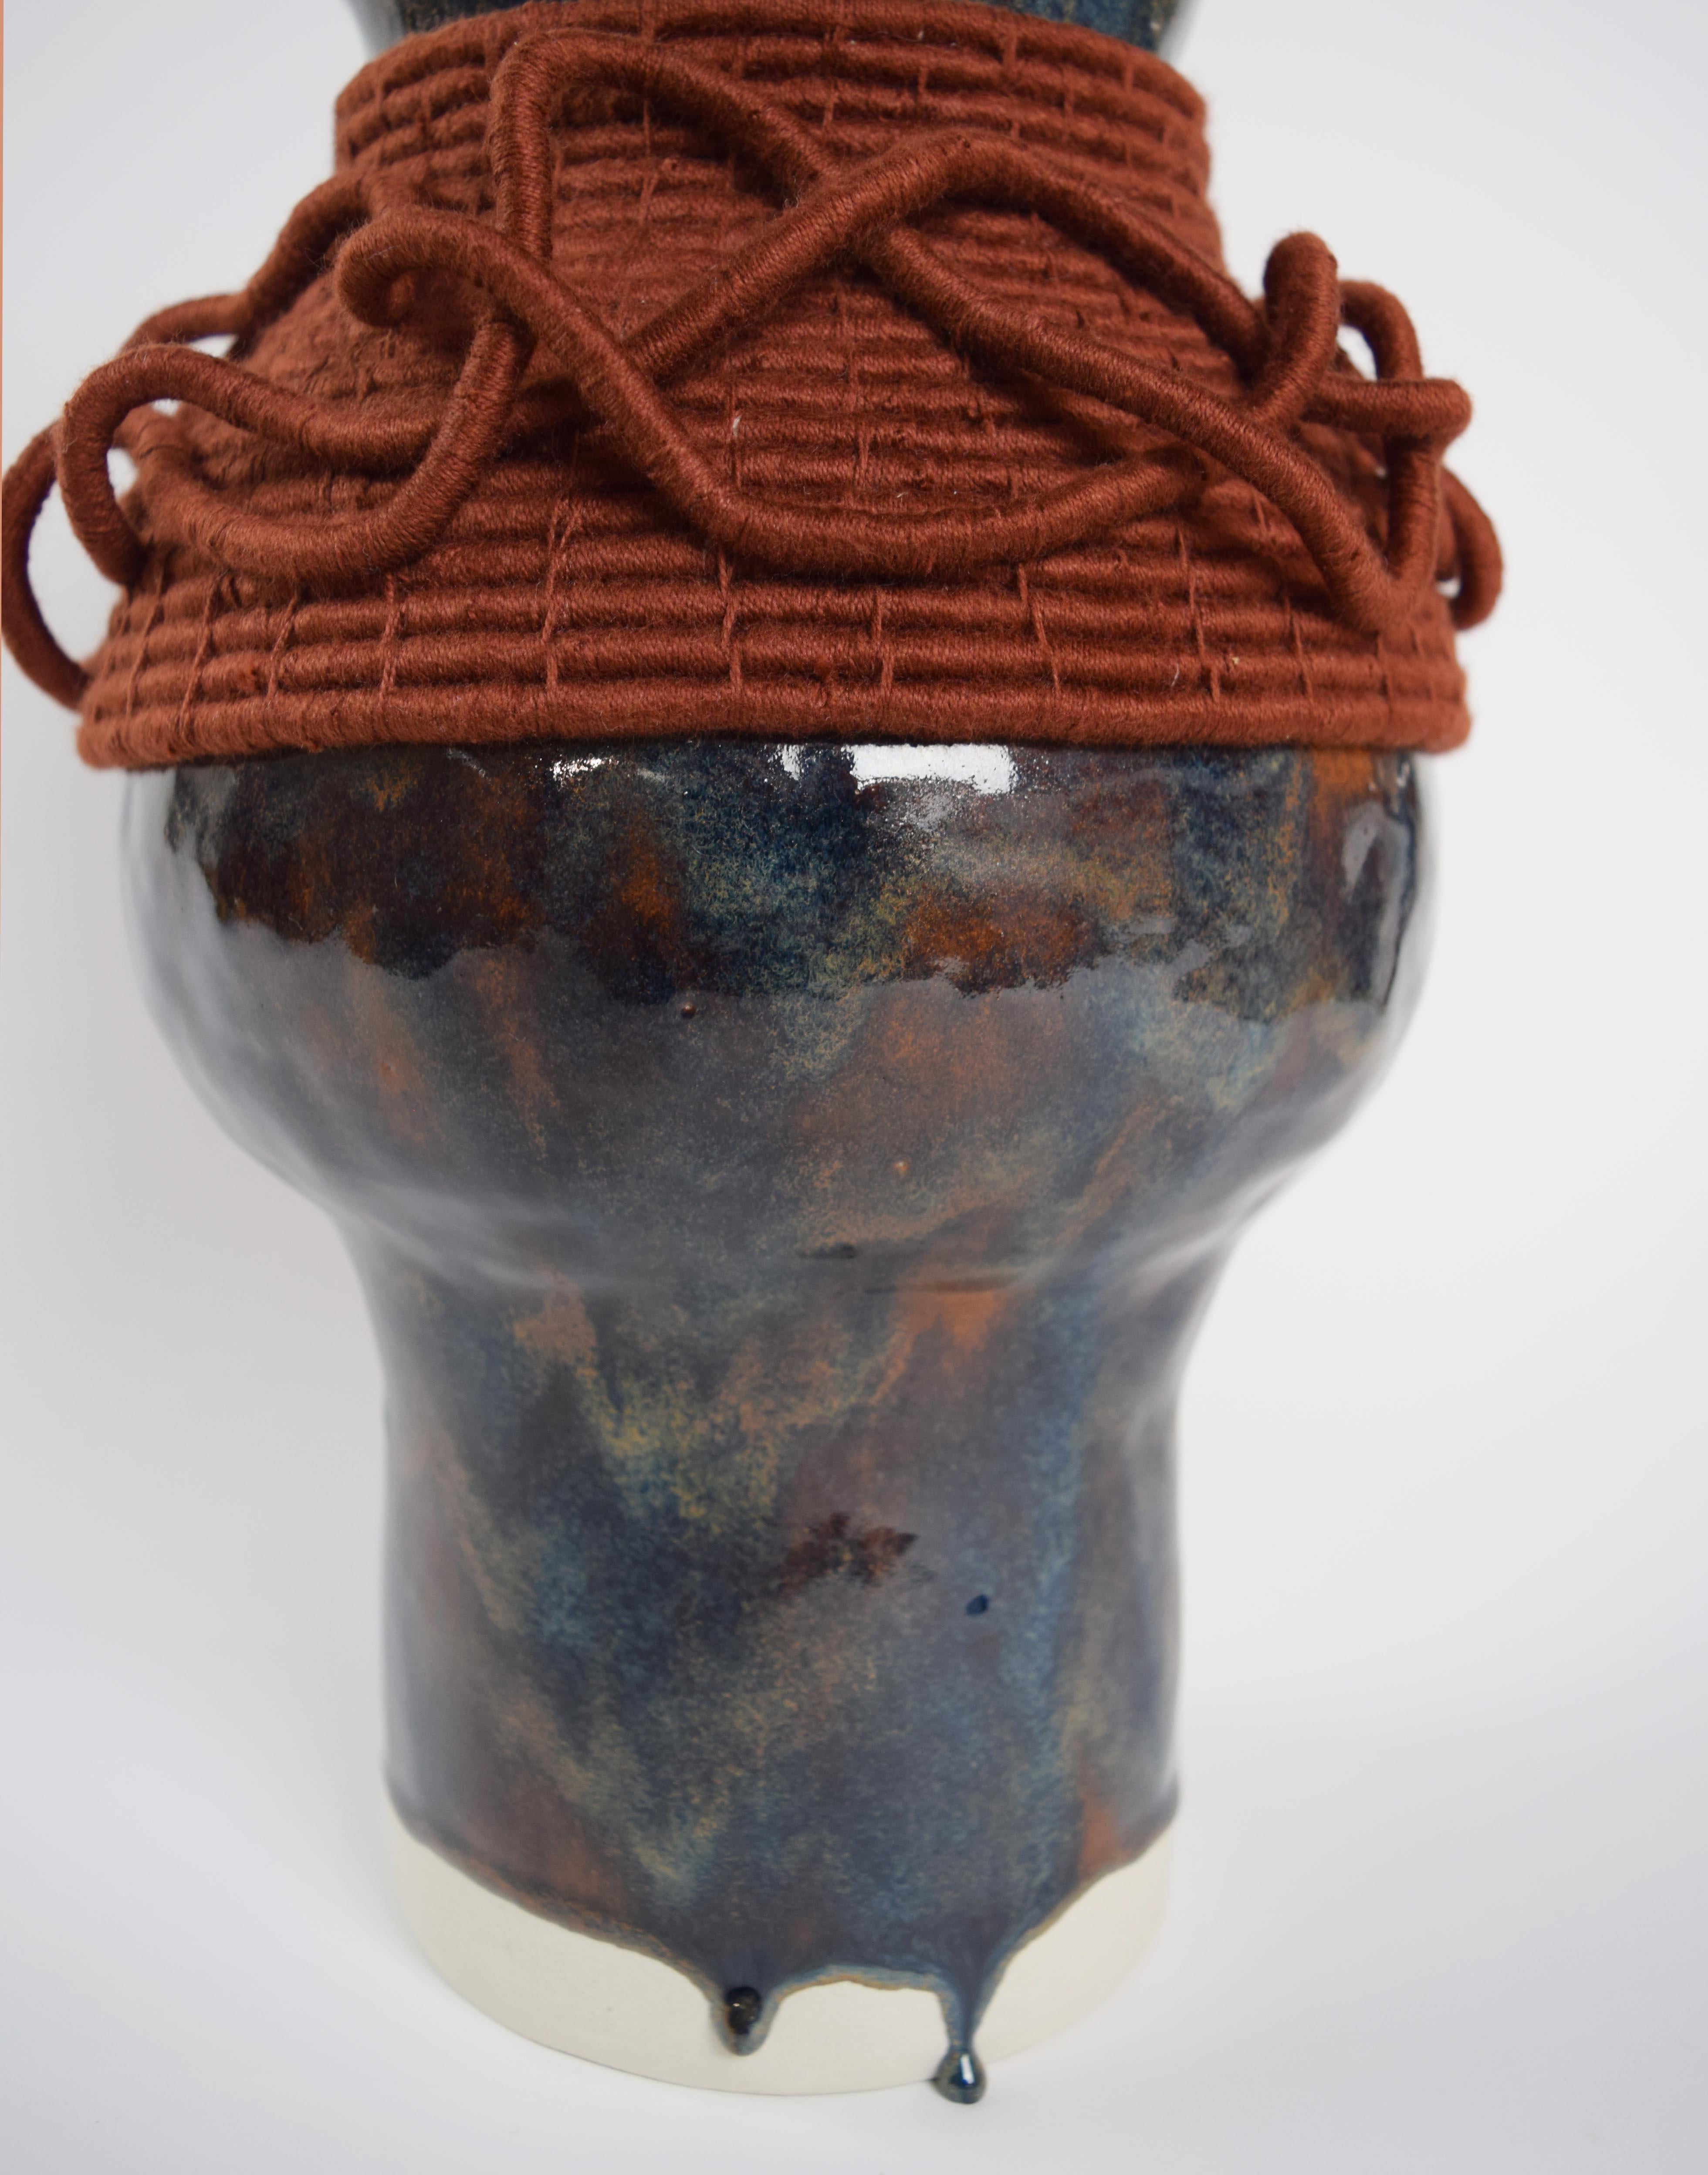 Hand-Crafted One of a Kind Ceramic and Woven Cotton Vase #728 in Brown with Rust Details